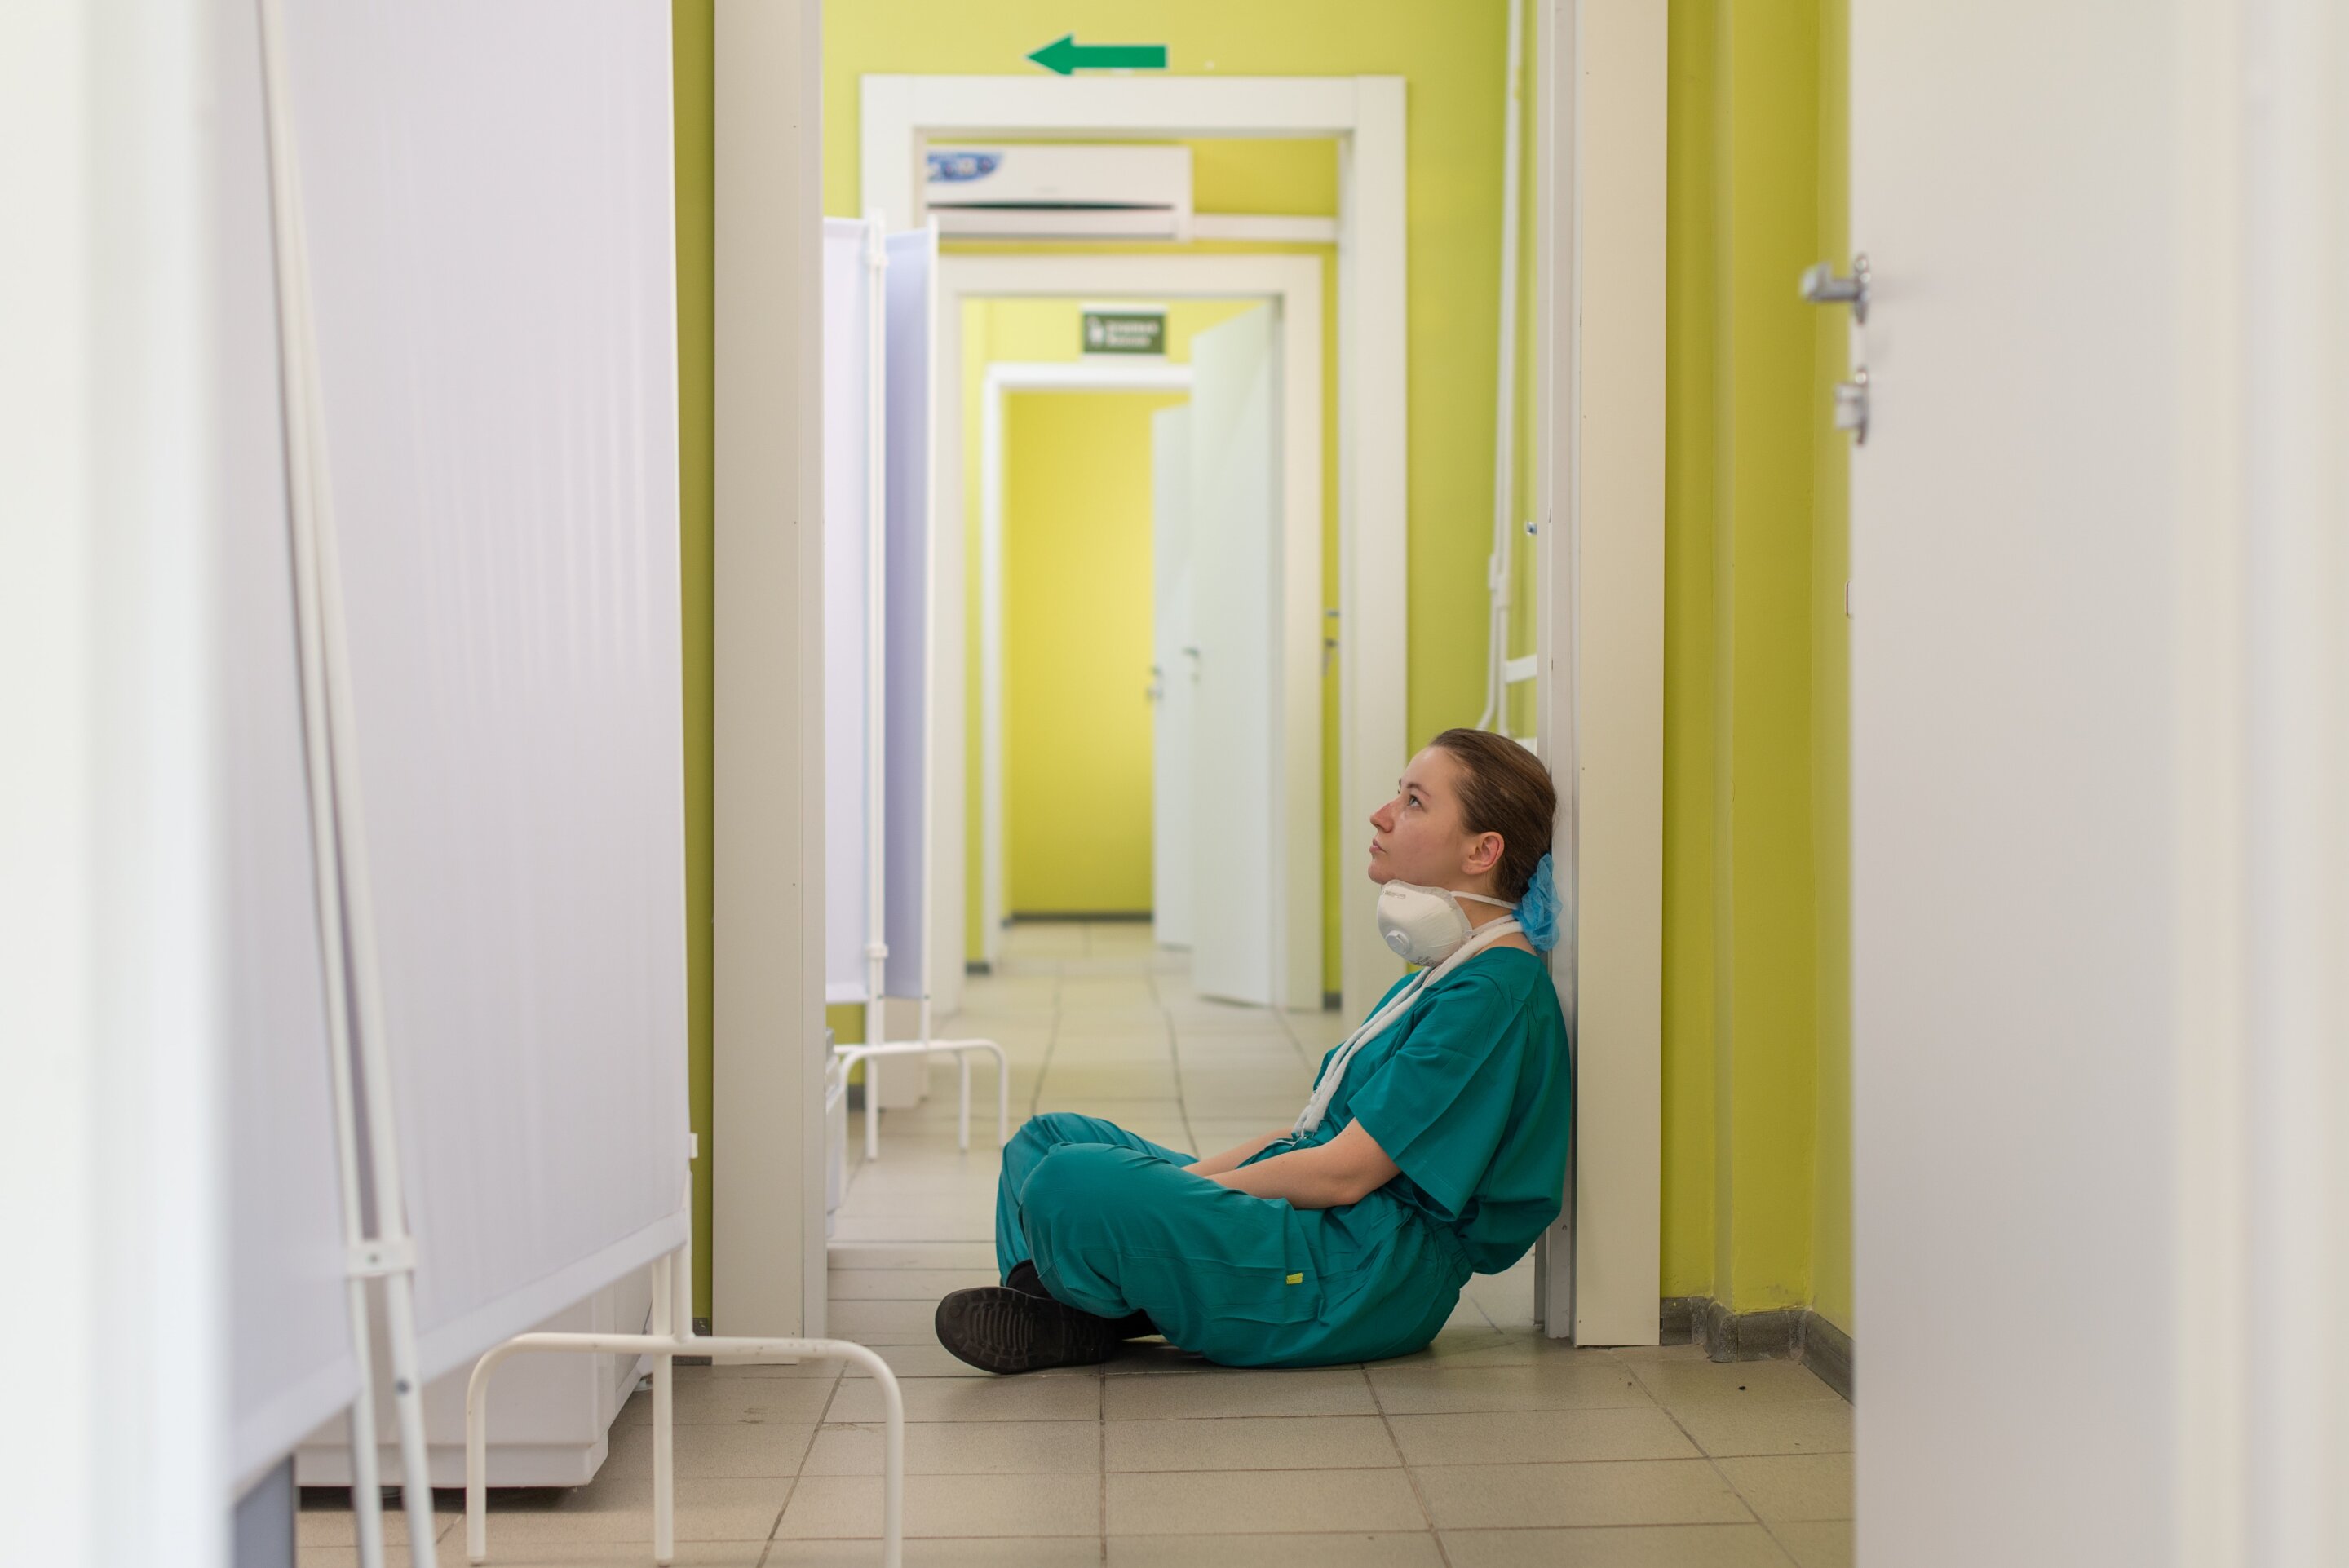 Stress management interventions may help individual health care workers for at least a year